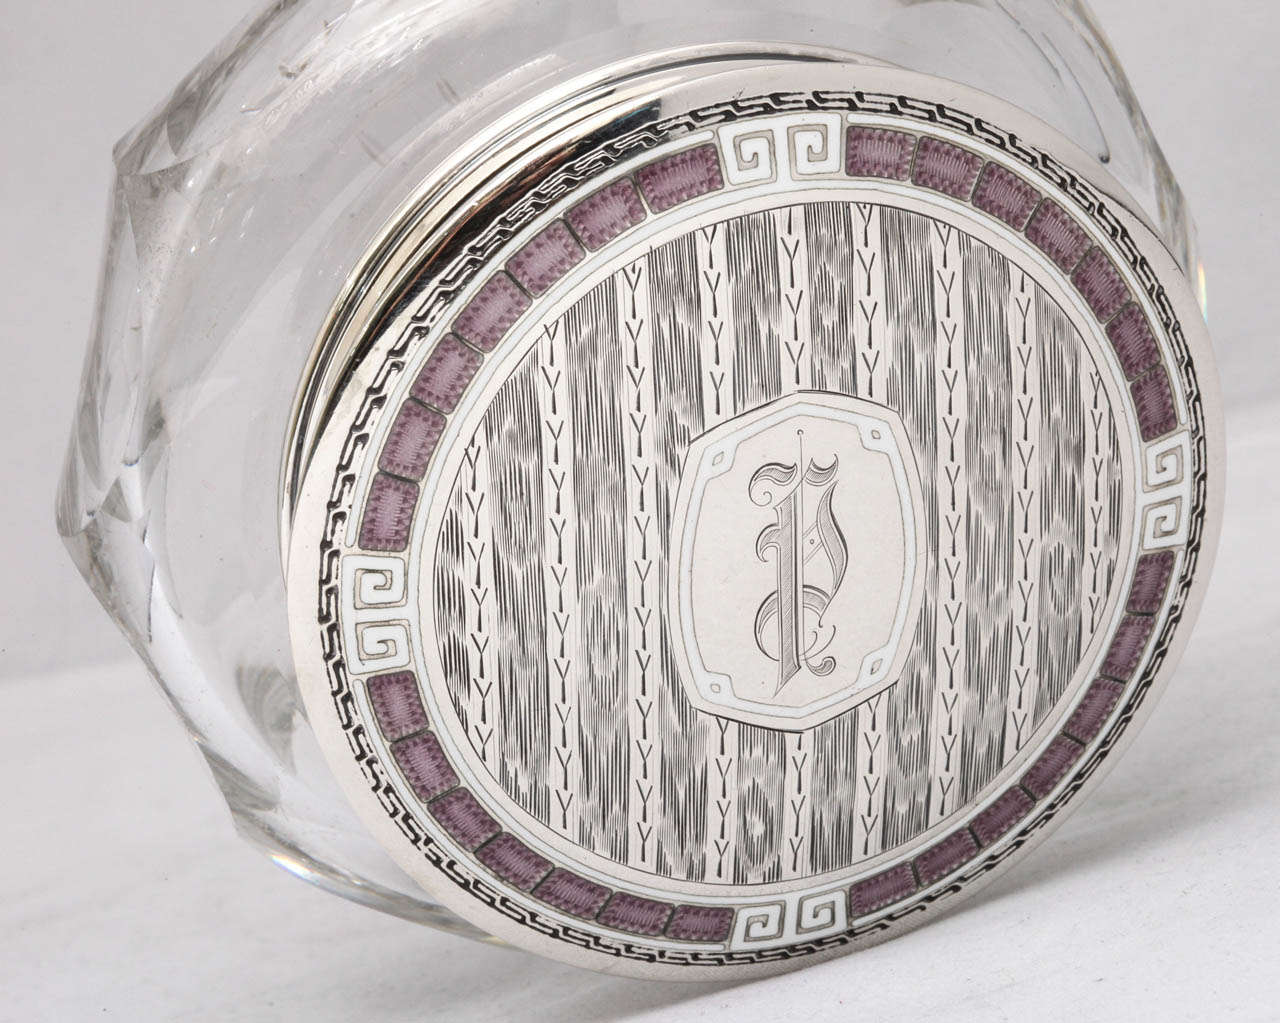 American Unusual Kerr Art Deco Powder Jar Mounted By a Sterling Silver and Purple and White Guiloche Enamel Lid